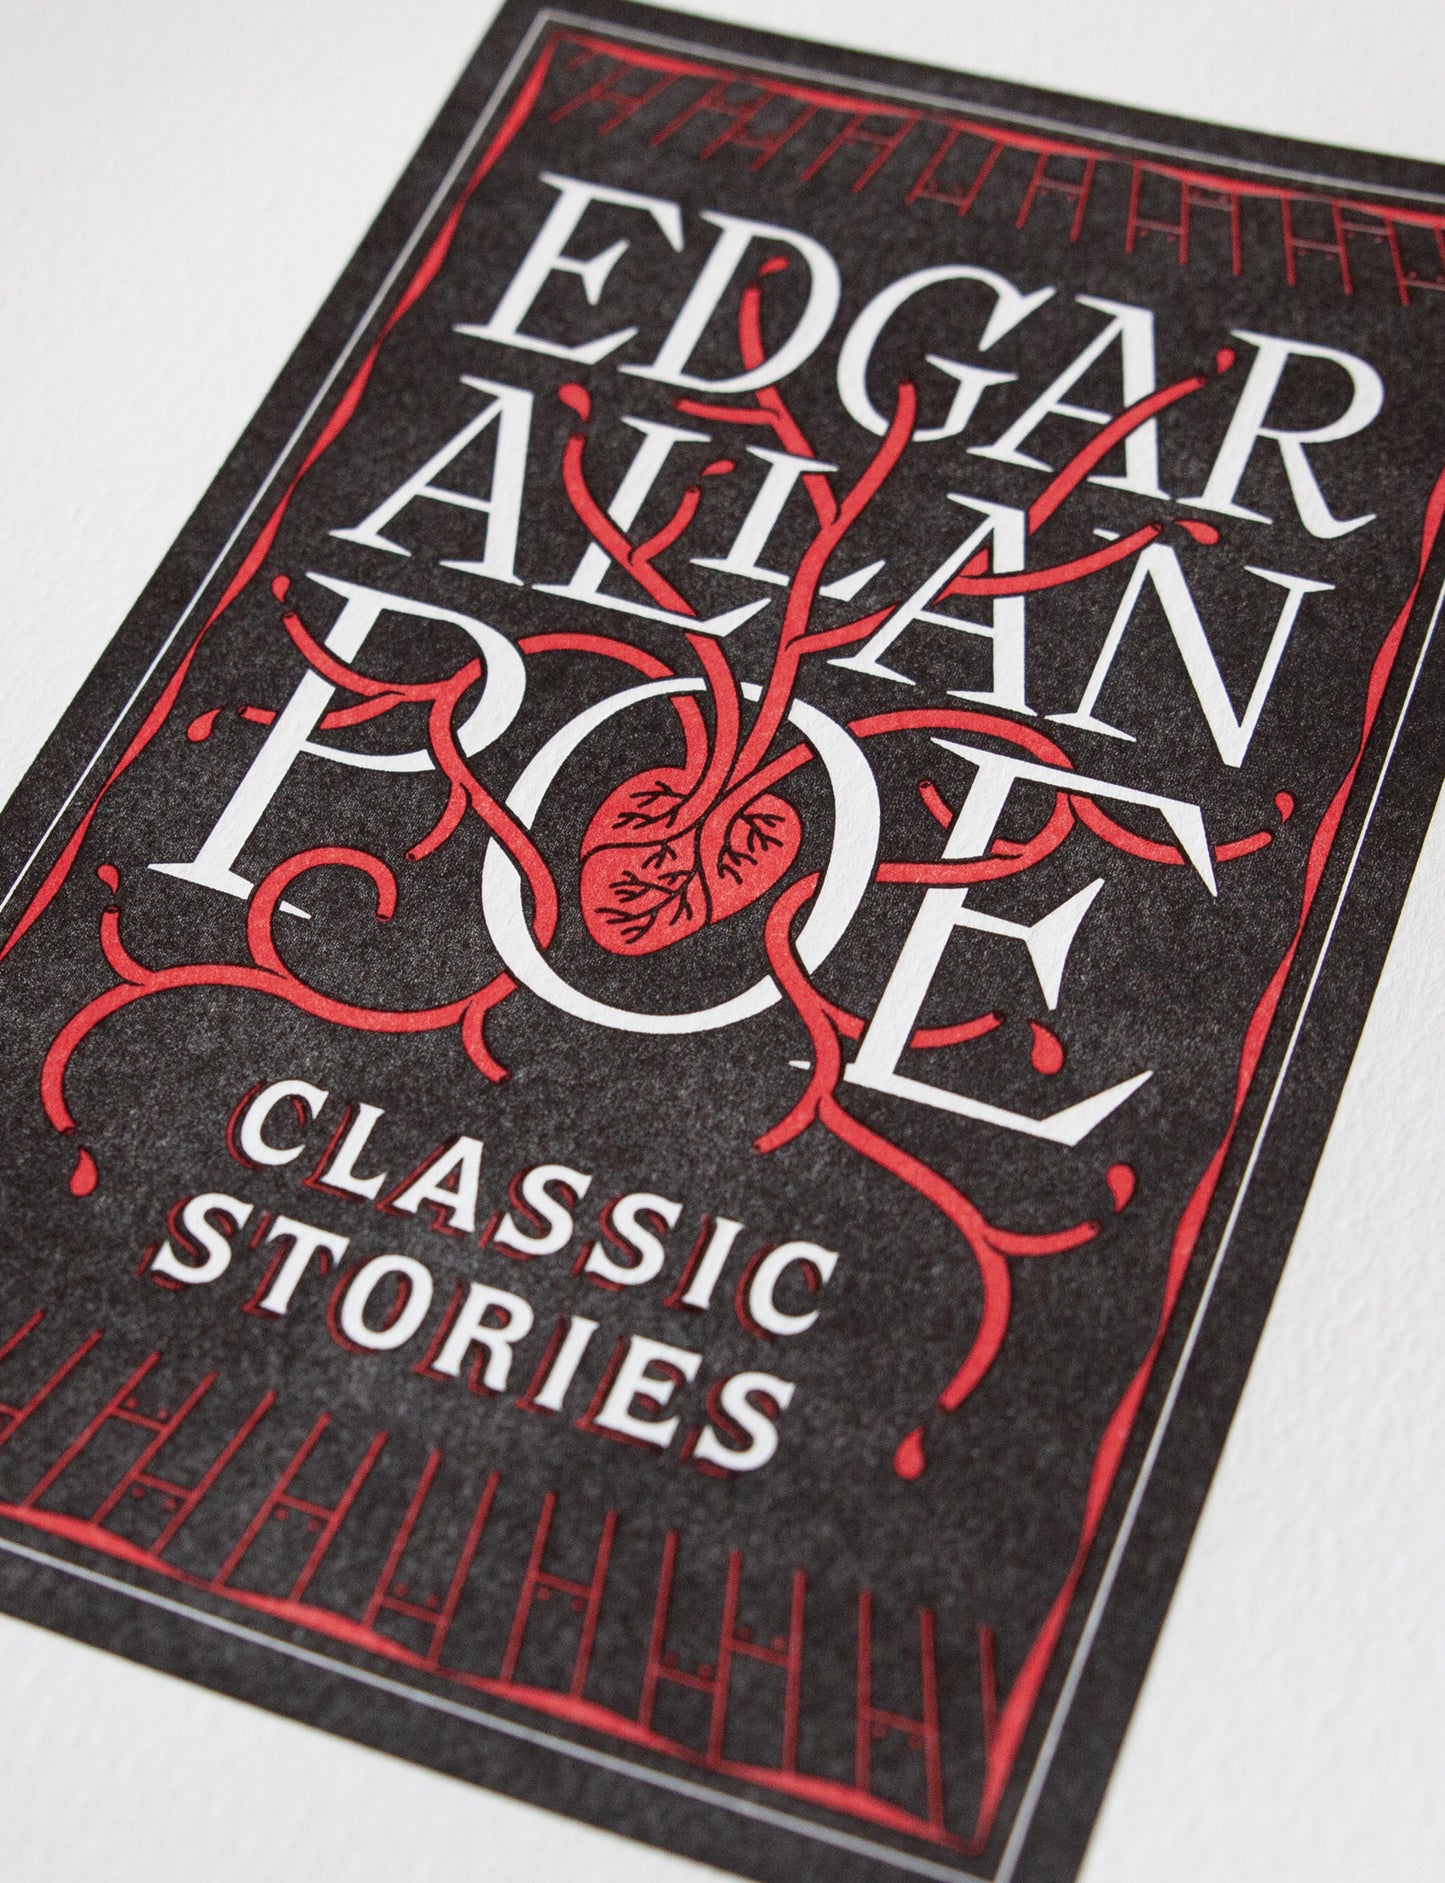 Close-up of a 2-color letterpress print in black and red. Printed artwork is an illustrated book cover of Edgar Allan Poe including custom hand lettering.